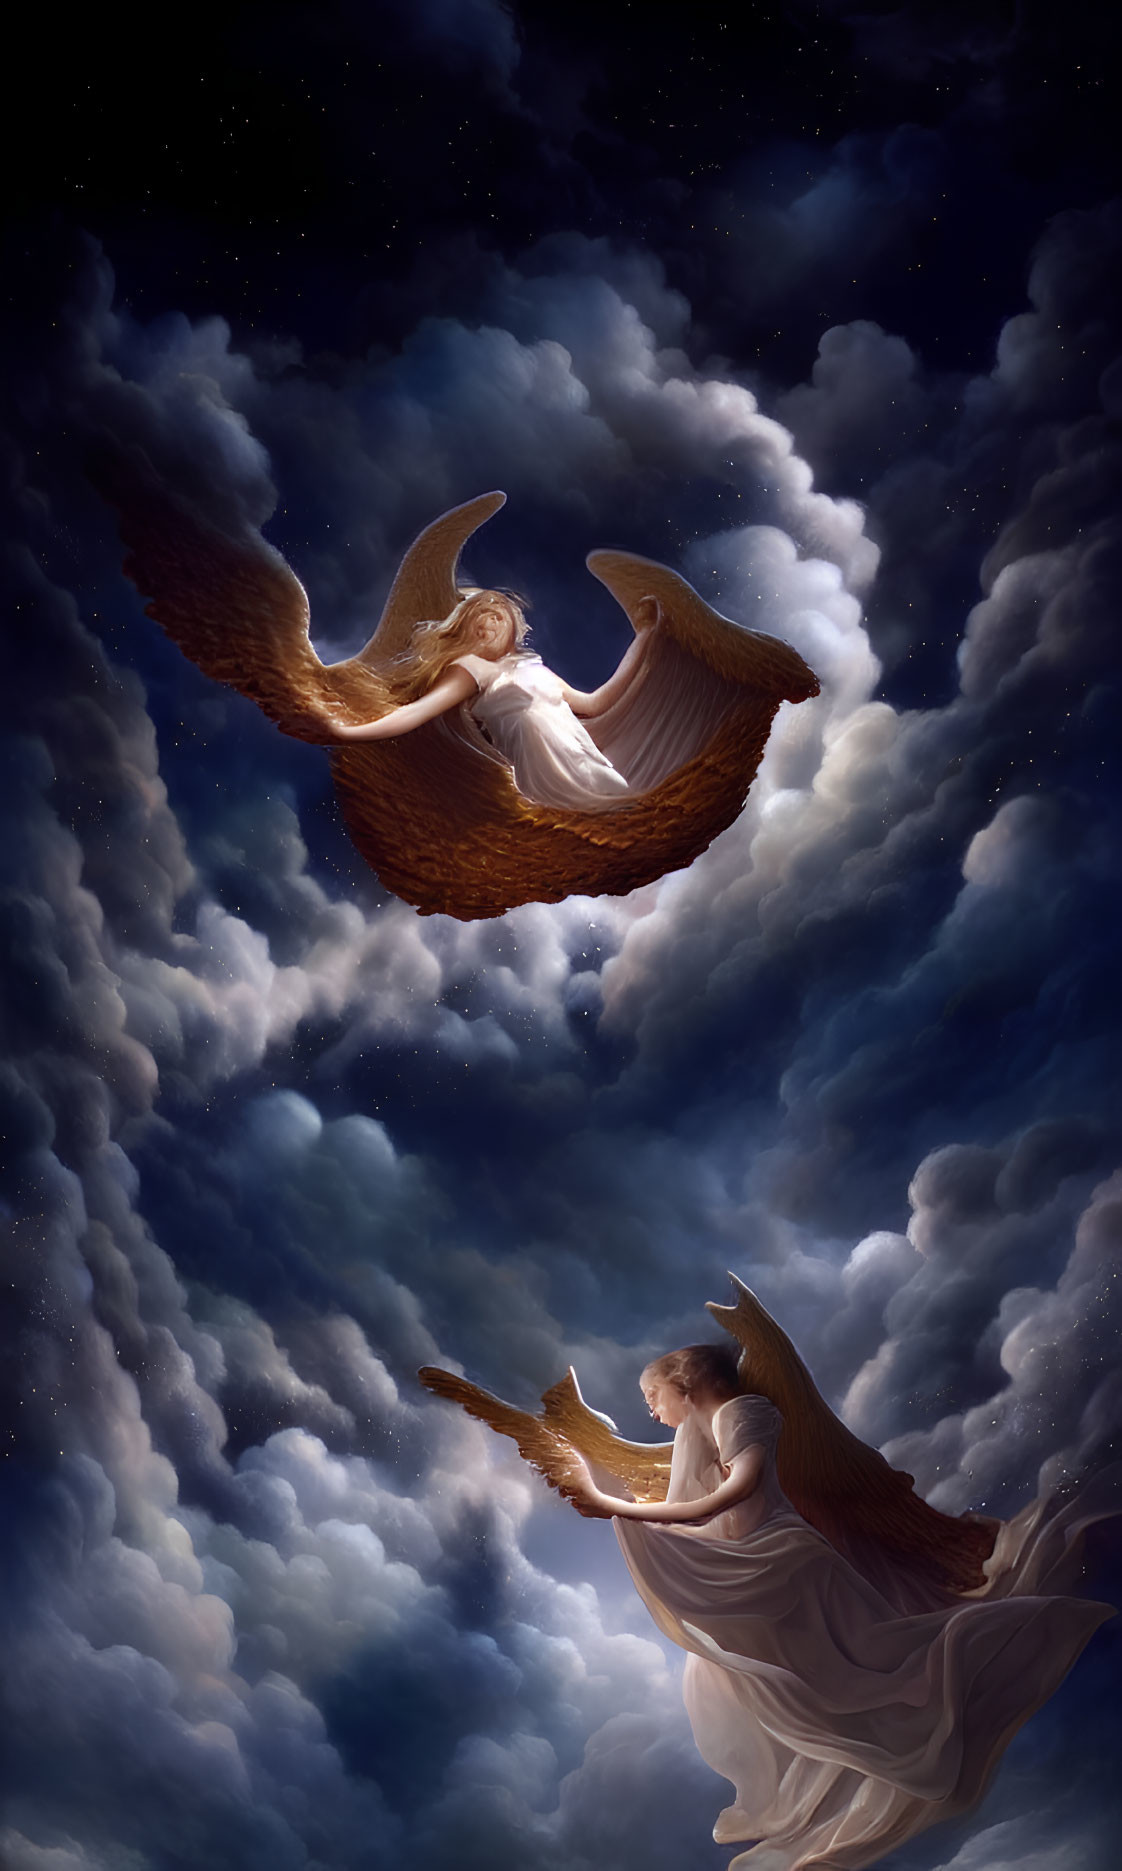 Angels in starry sky with outstretched wings and clouds